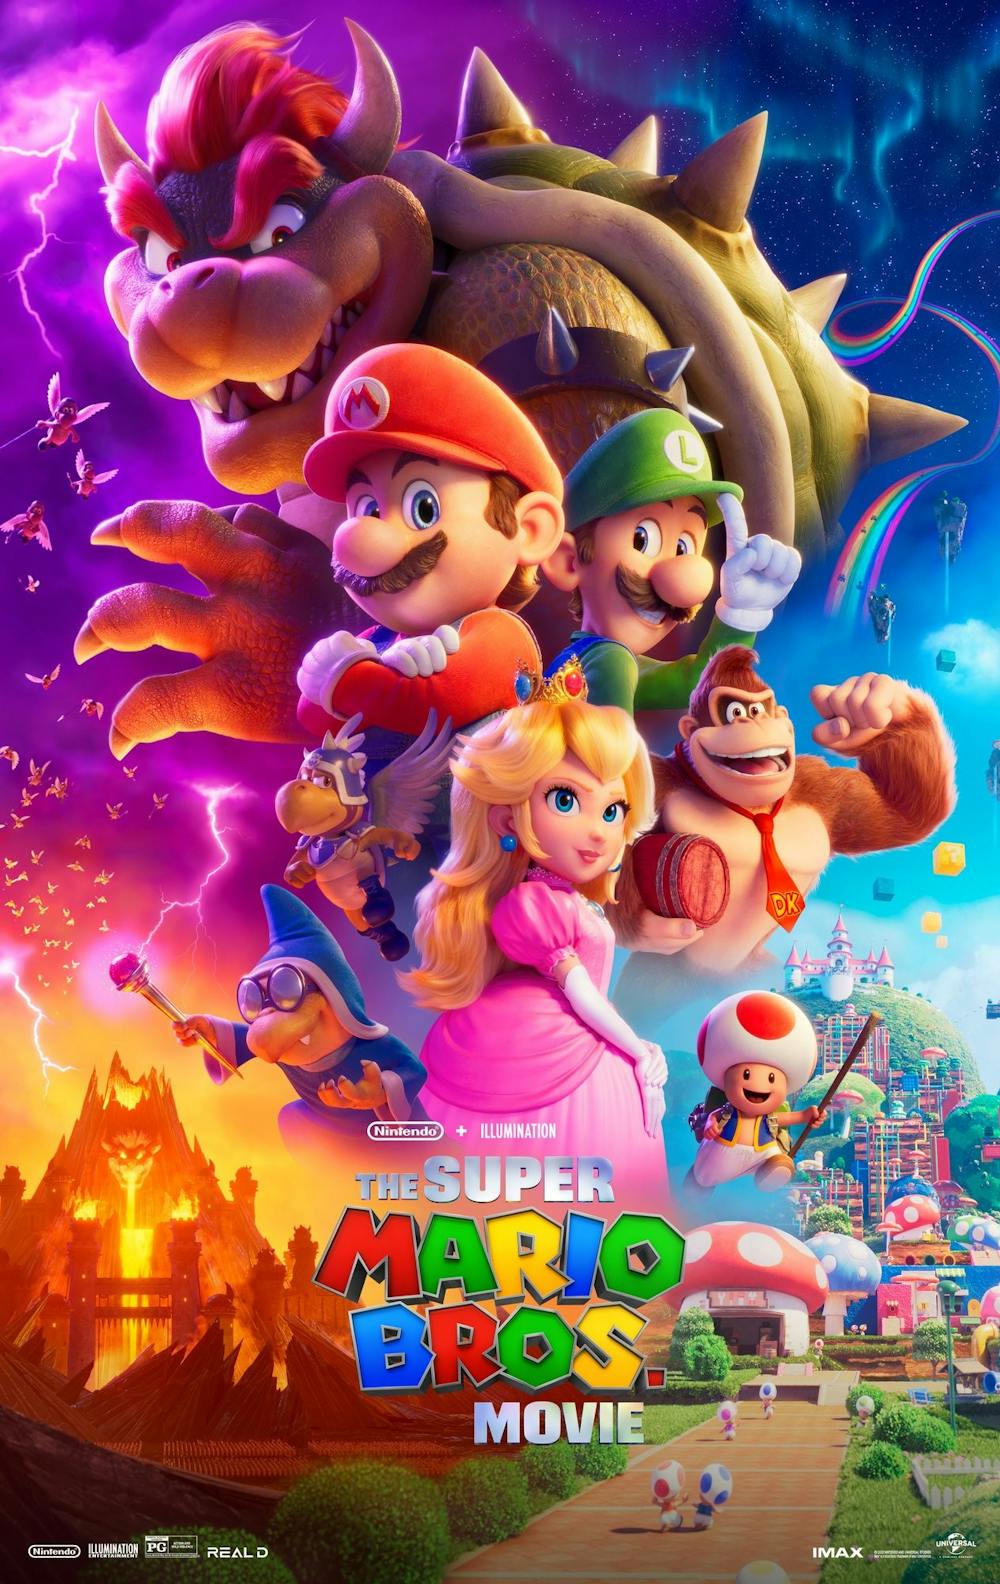 Review: ‘The Super Mario Bros. Movie’ is the origin story fans have been waiting for 